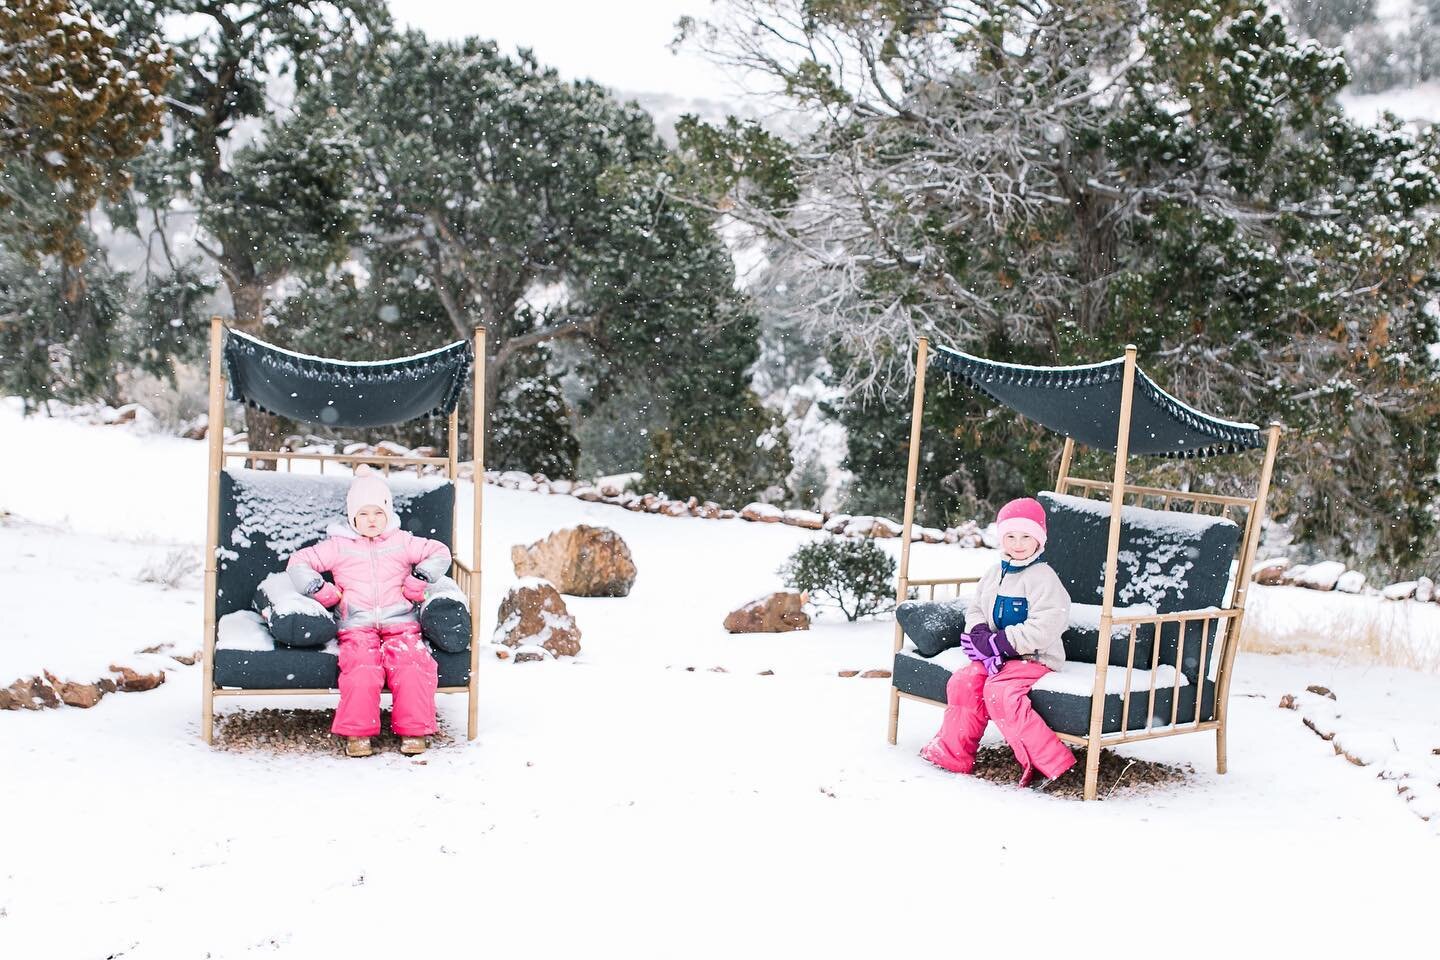 This past Friday we were surprised with a Snow Day at the Casa!

The kids loved it while it lasted&hellip;.. 24 hours later we were hiking in sunshine and shorts. #santafeweather